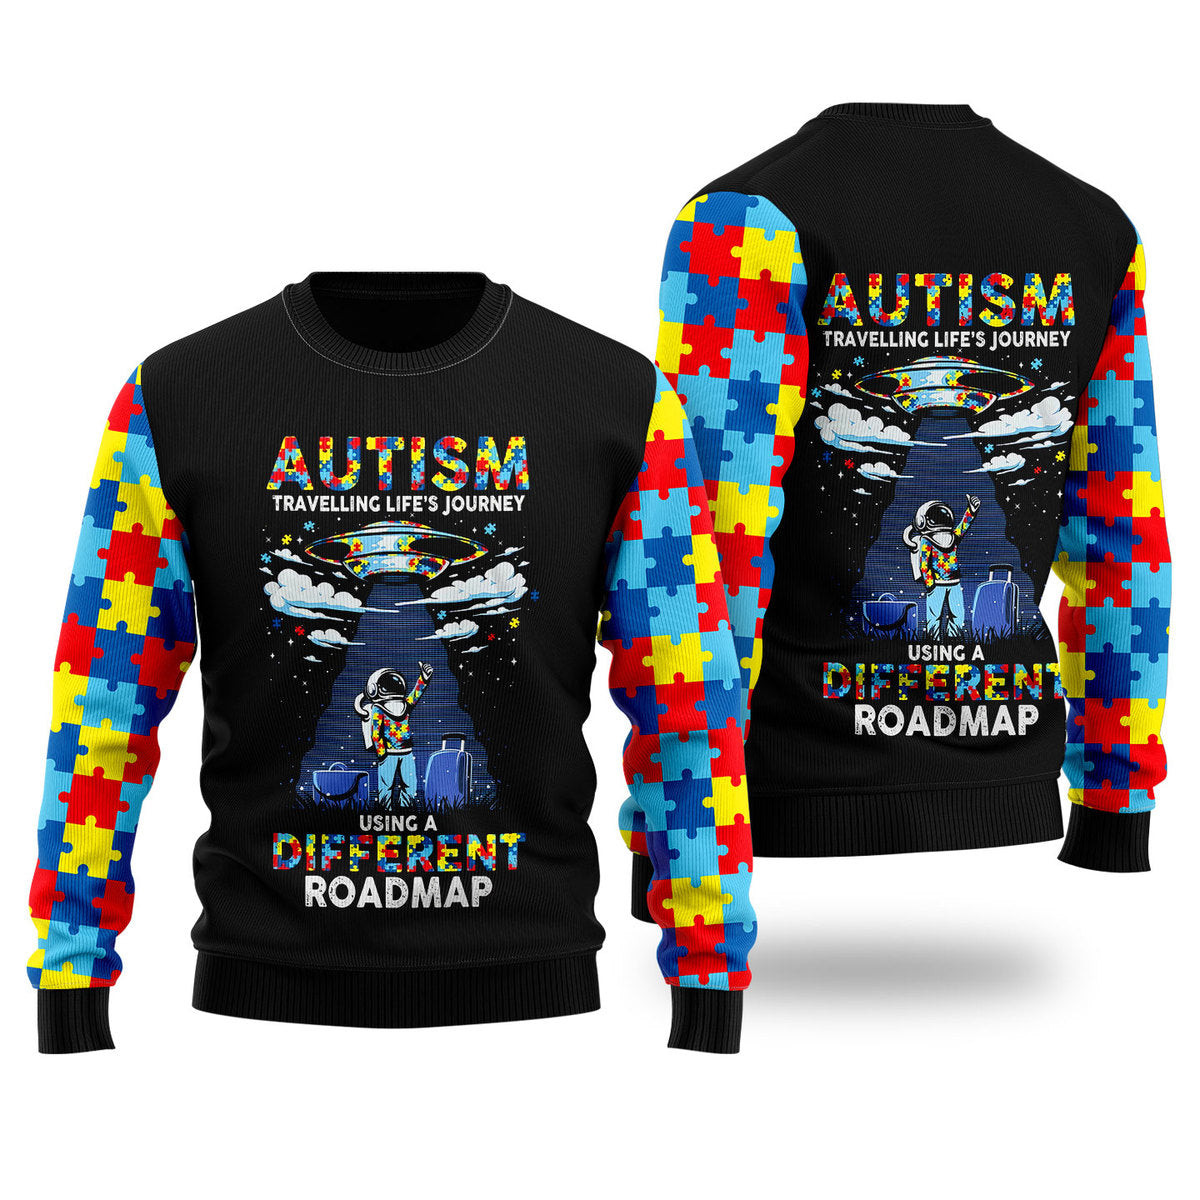 Autism Using A Different Roadmap Ugly Christmas Sweater Ugly Sweater For Men Women, Holiday Sweater